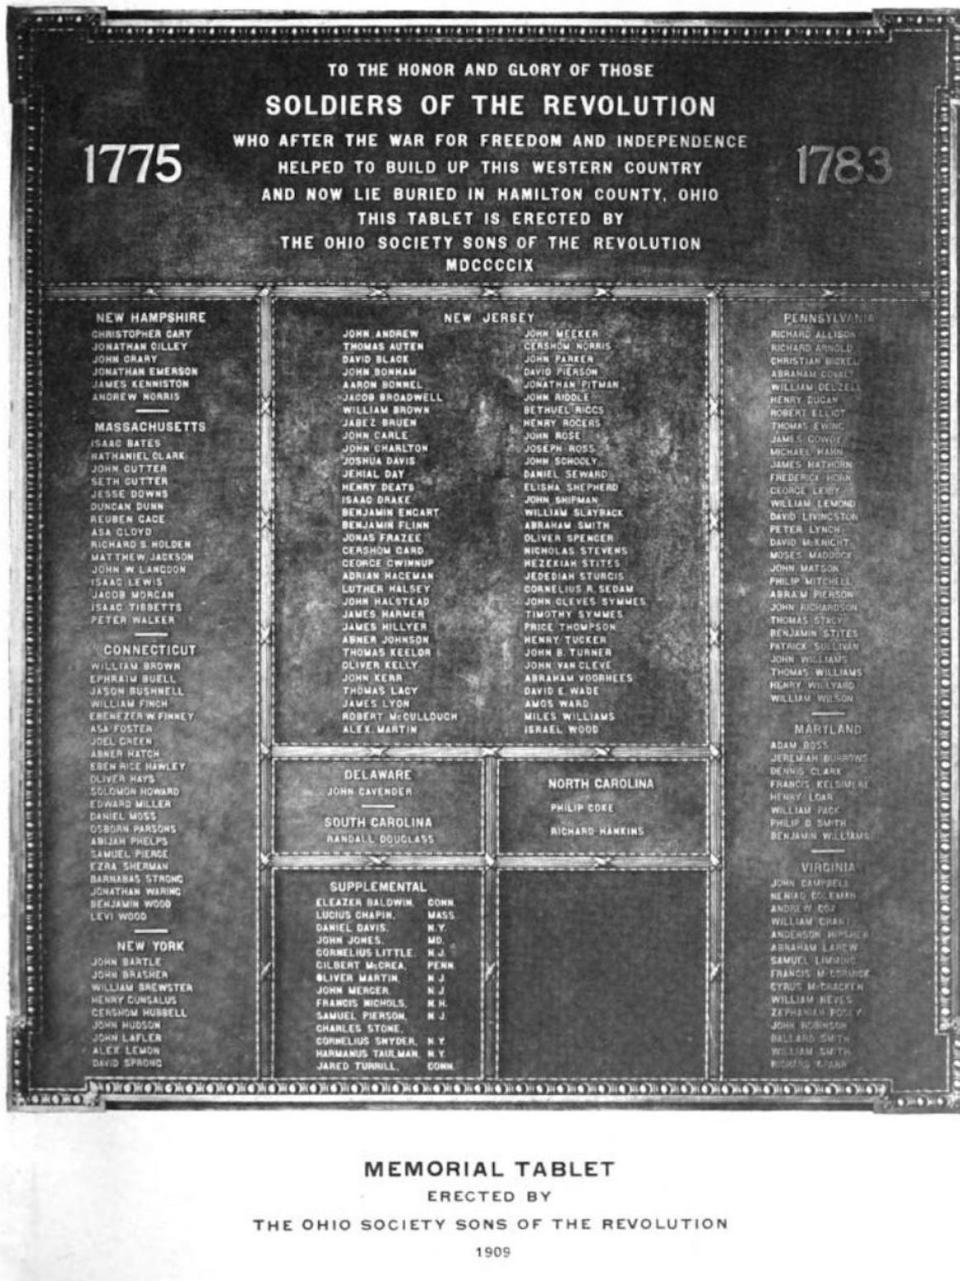 A plaque for the Soldiers of the Revolution, placed in Cincinnati’s Memorial Hall by the Ohio Society Sons of the Revolution in 1909, lists 185 Revolutionary War veterans buried in Hamilton County.